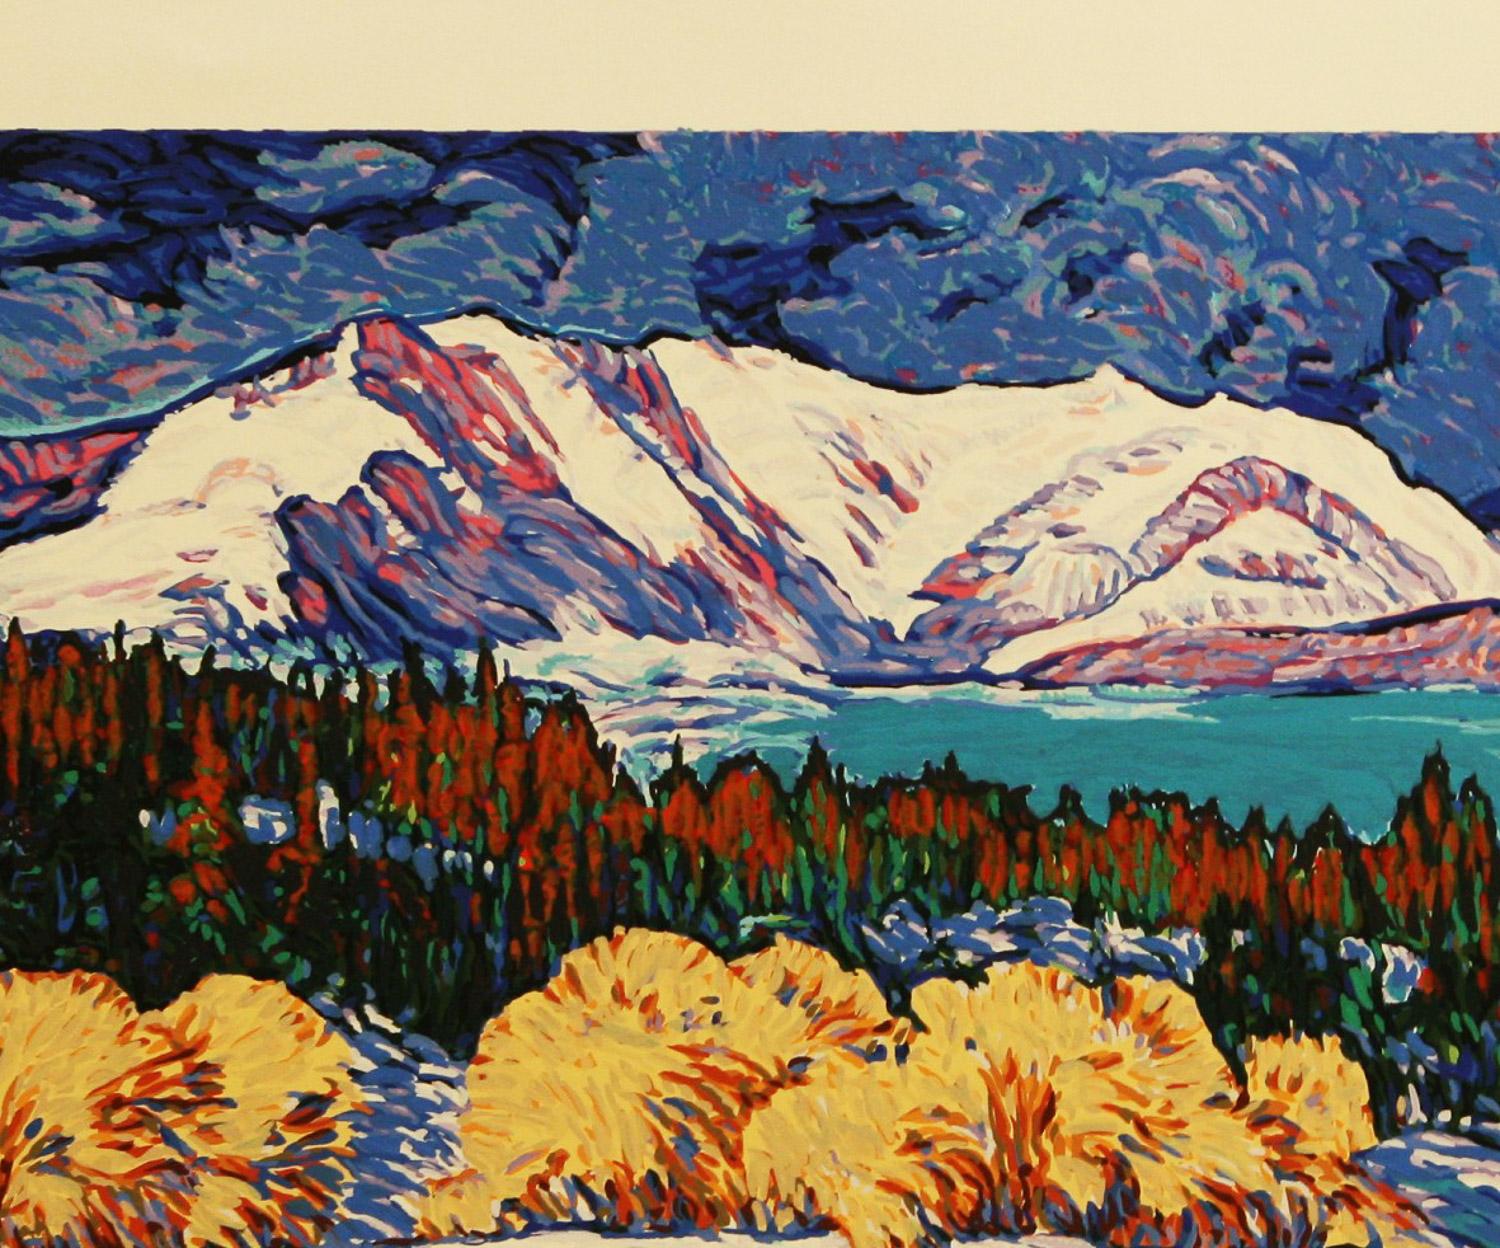        Chama Winter is a hand-pulled, limited edition serigraph, no. 133 /260 and is signed in pencil by the artist. Published by Aspen Mountain Graphic It is in excellent condition. paper size 14 x 18 image size 12 x 16.
     Robert Daughters (b.